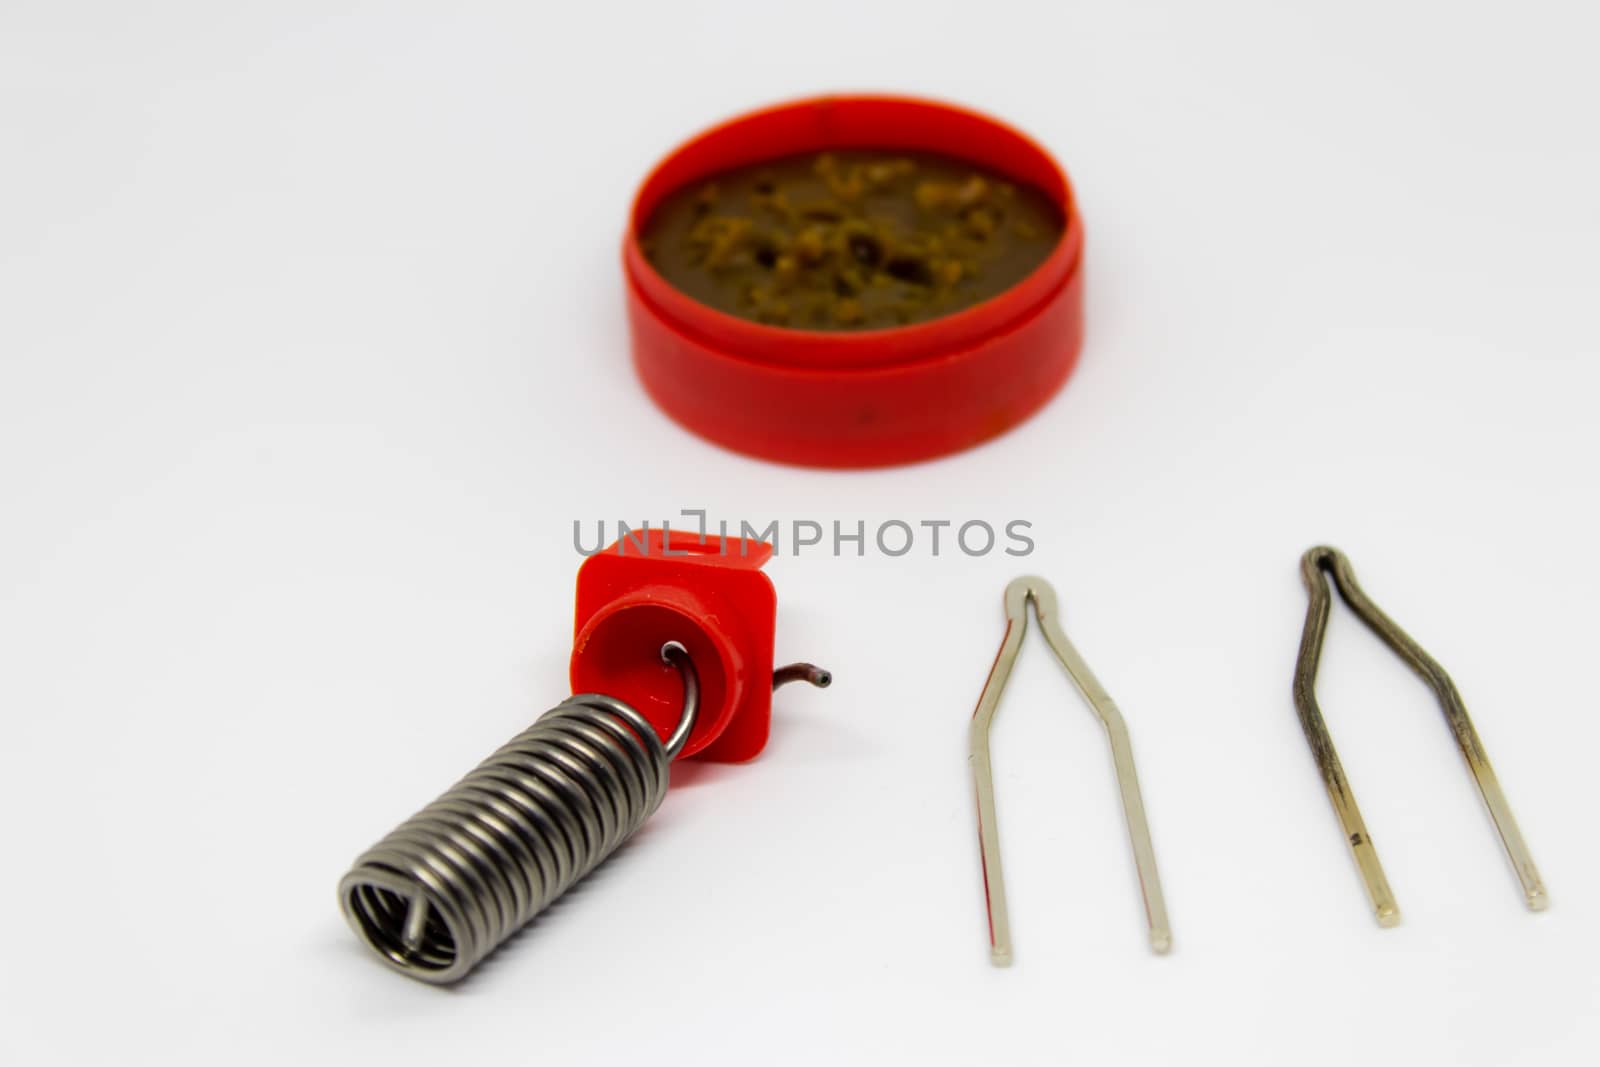 coil spring and grease closeup shoot with white background. photo has taken as product photo.